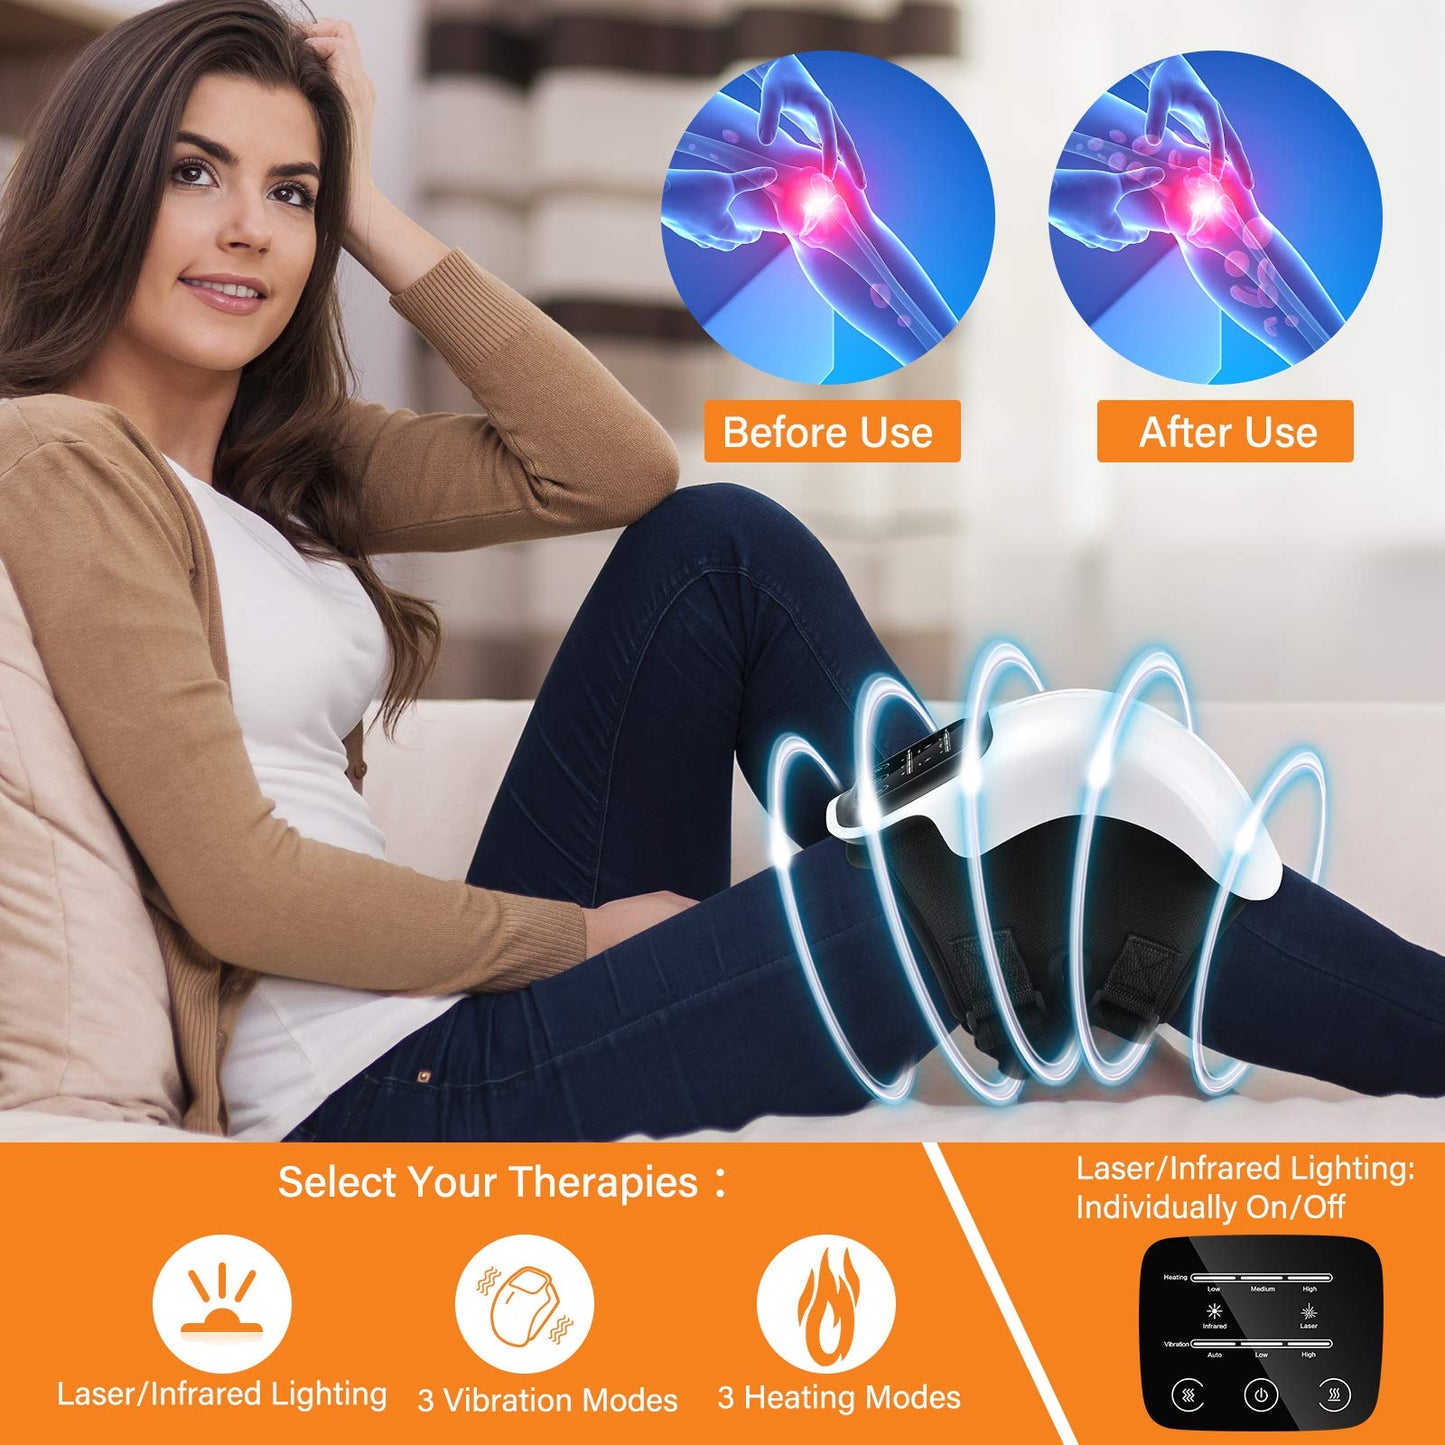 FORTHiQ Cordless Knee Massager, FDA Registered, Infrared Heat and Vibration Knee Pain Relief for Swelling Stiff Joints, Stretched Ligament and Muscles Injuries, August 2022 Longer Knee Straps